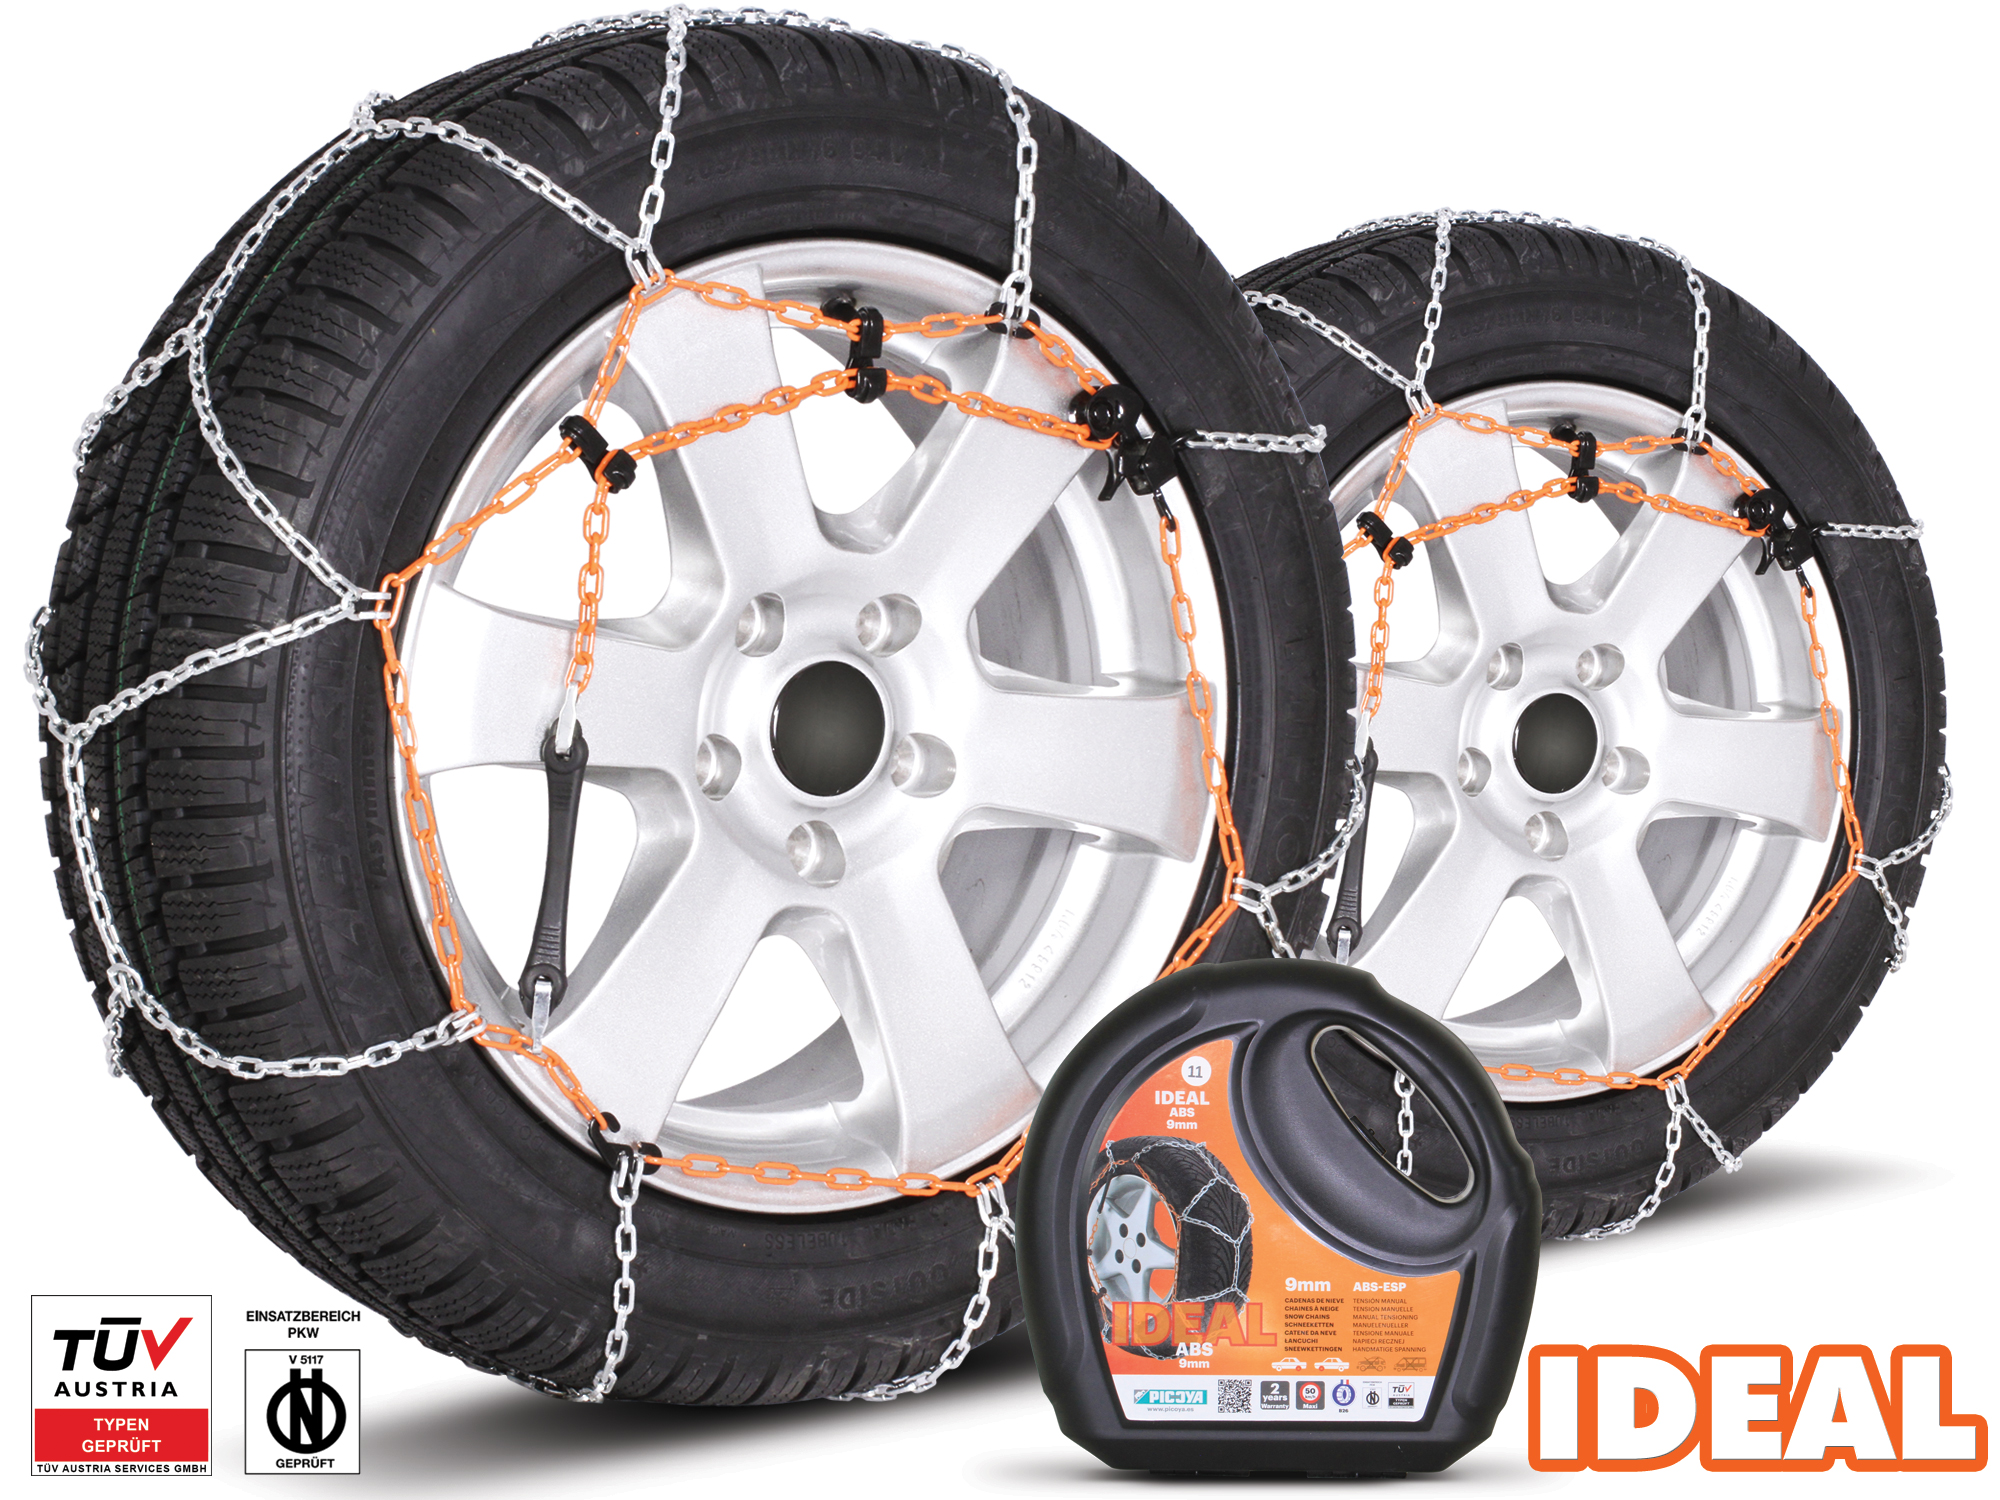 Snow Chains- Ideal - Size 10 